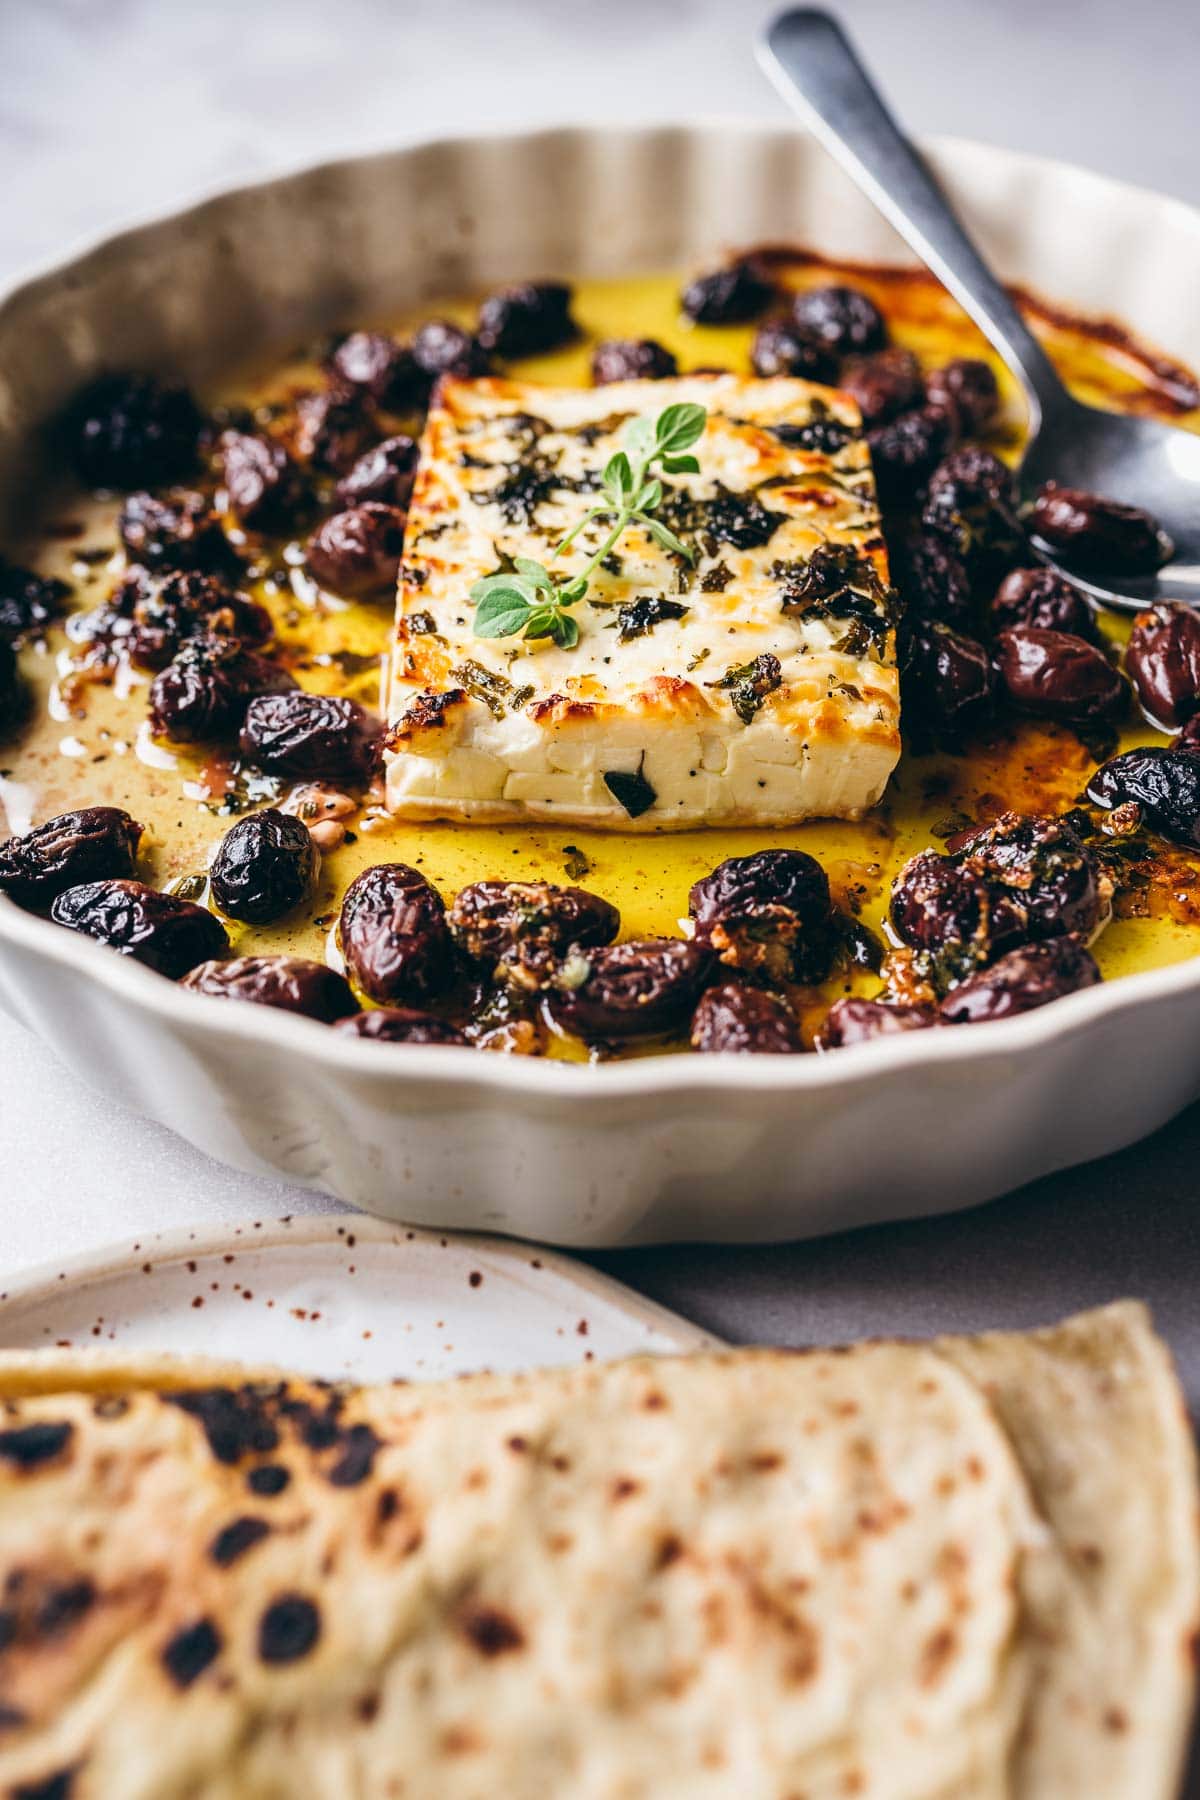 a side view of freshly baked feta cheese resting in a dish of olive oil and olives